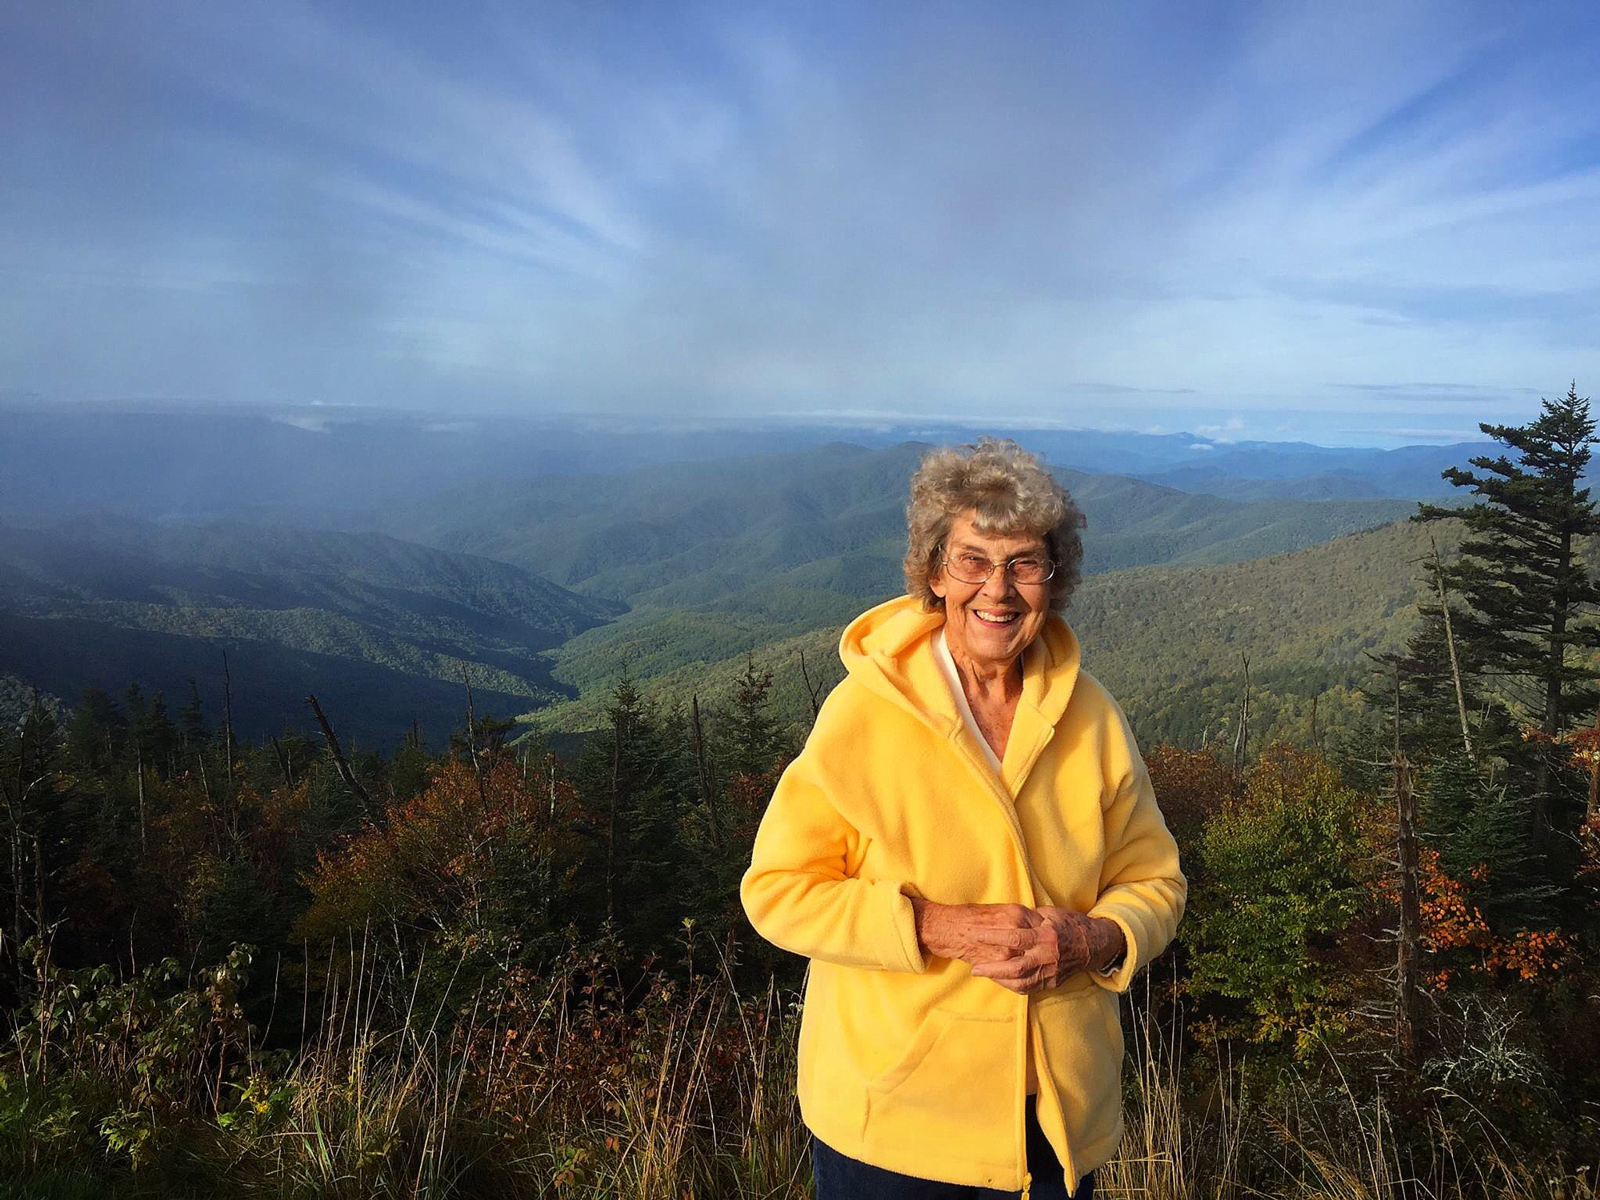 Grandma Joy at the top of Clingman's Dome, Great Smoky Mountains National Park, Tennessee